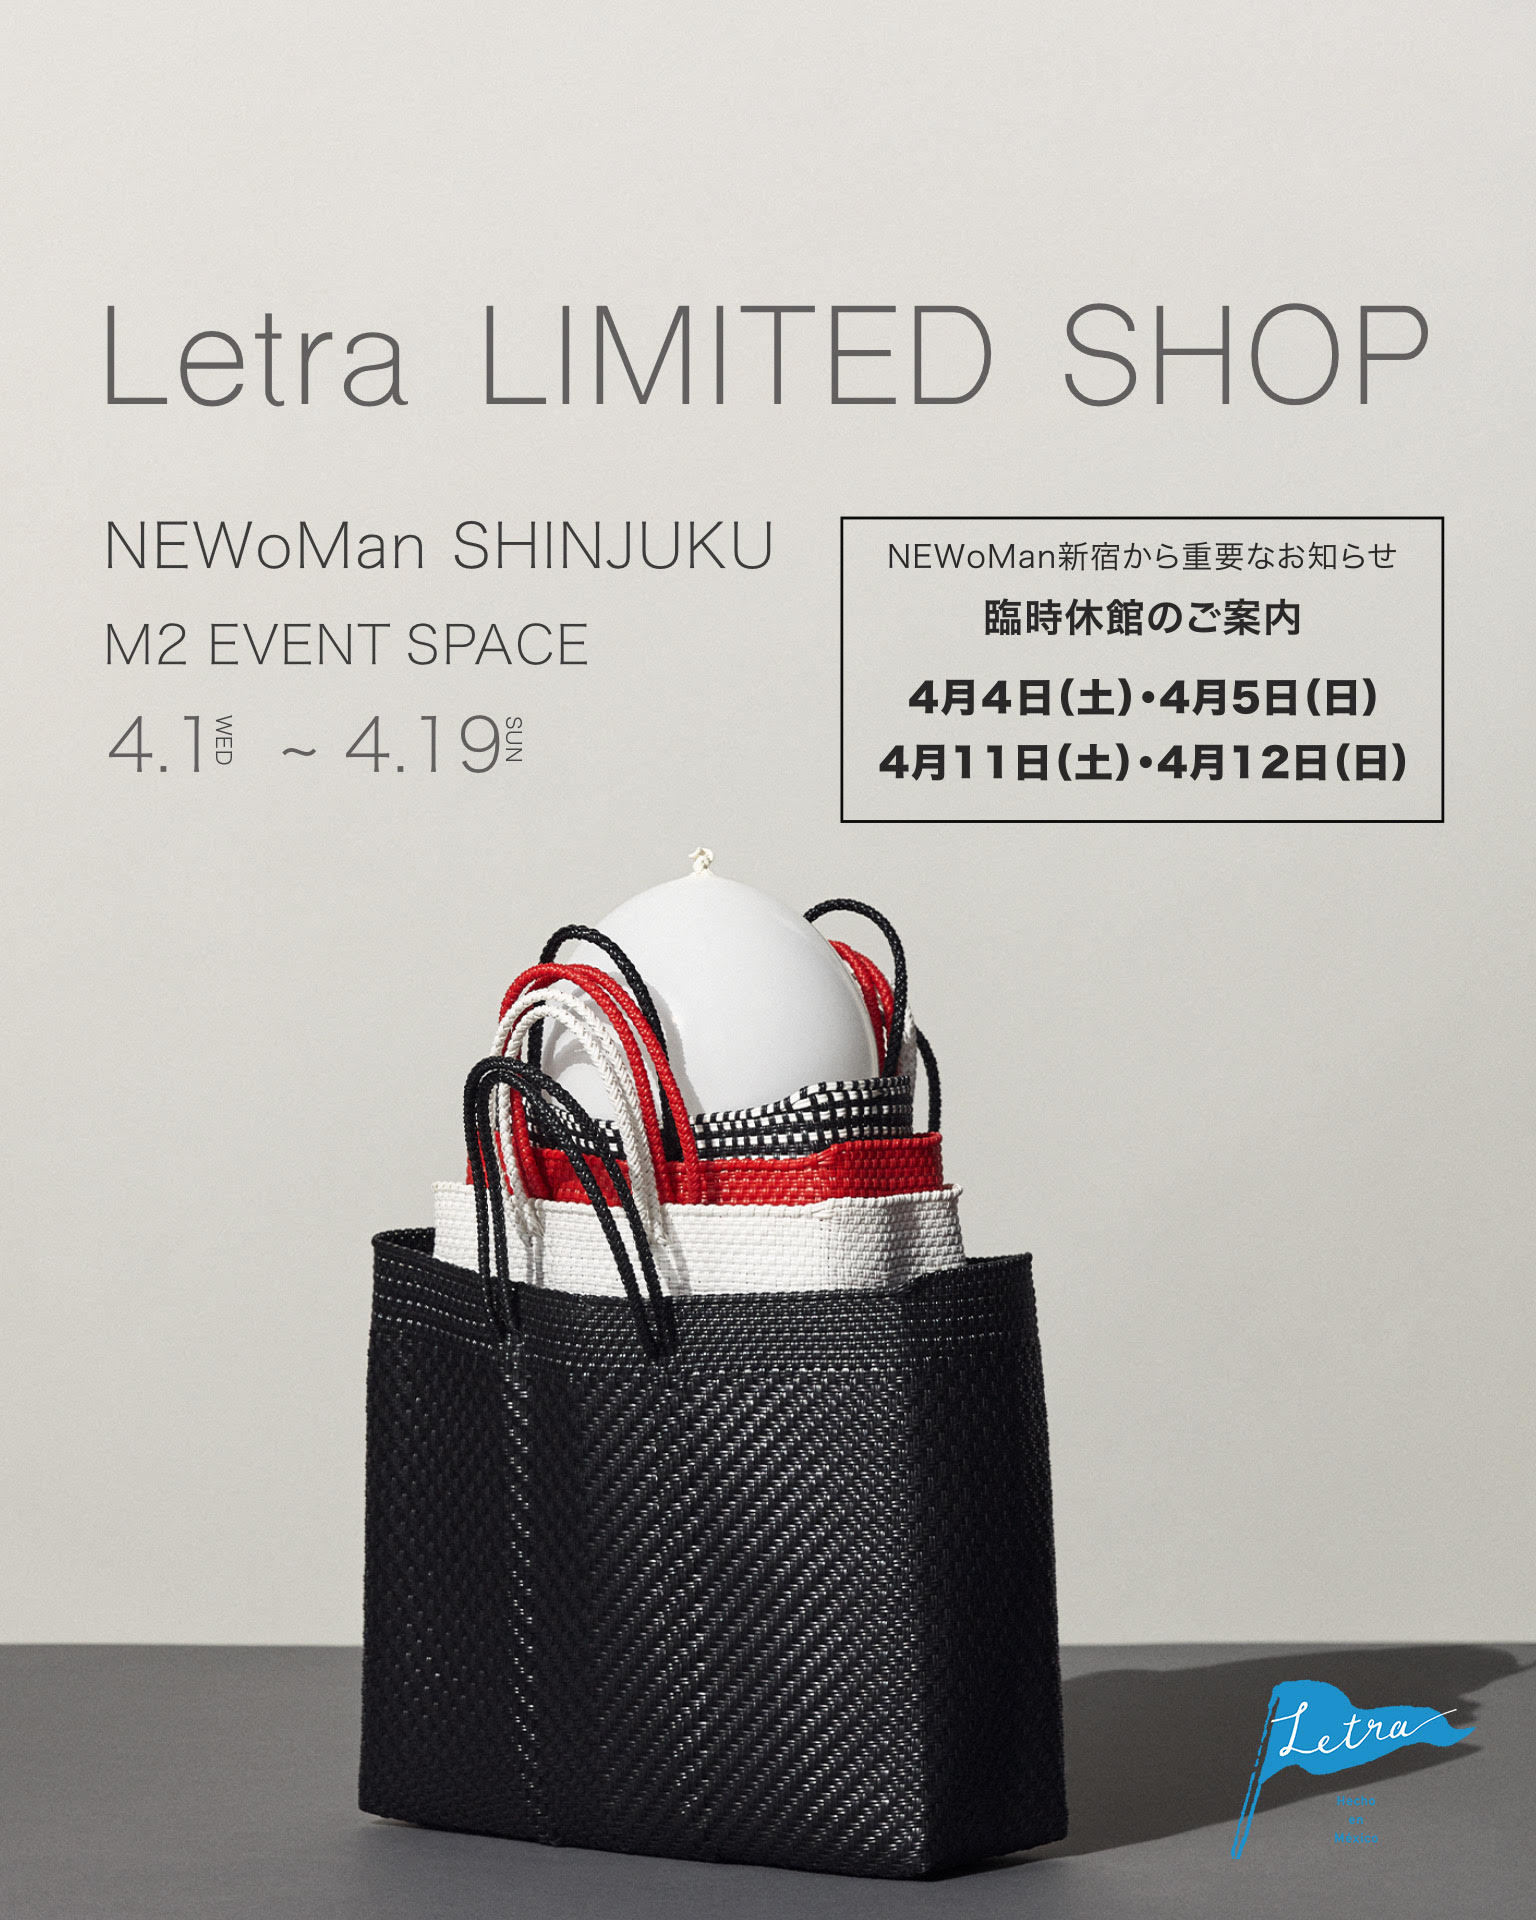 NEWoMan 新宿　Limited SHOP 臨時休館のお知らせ